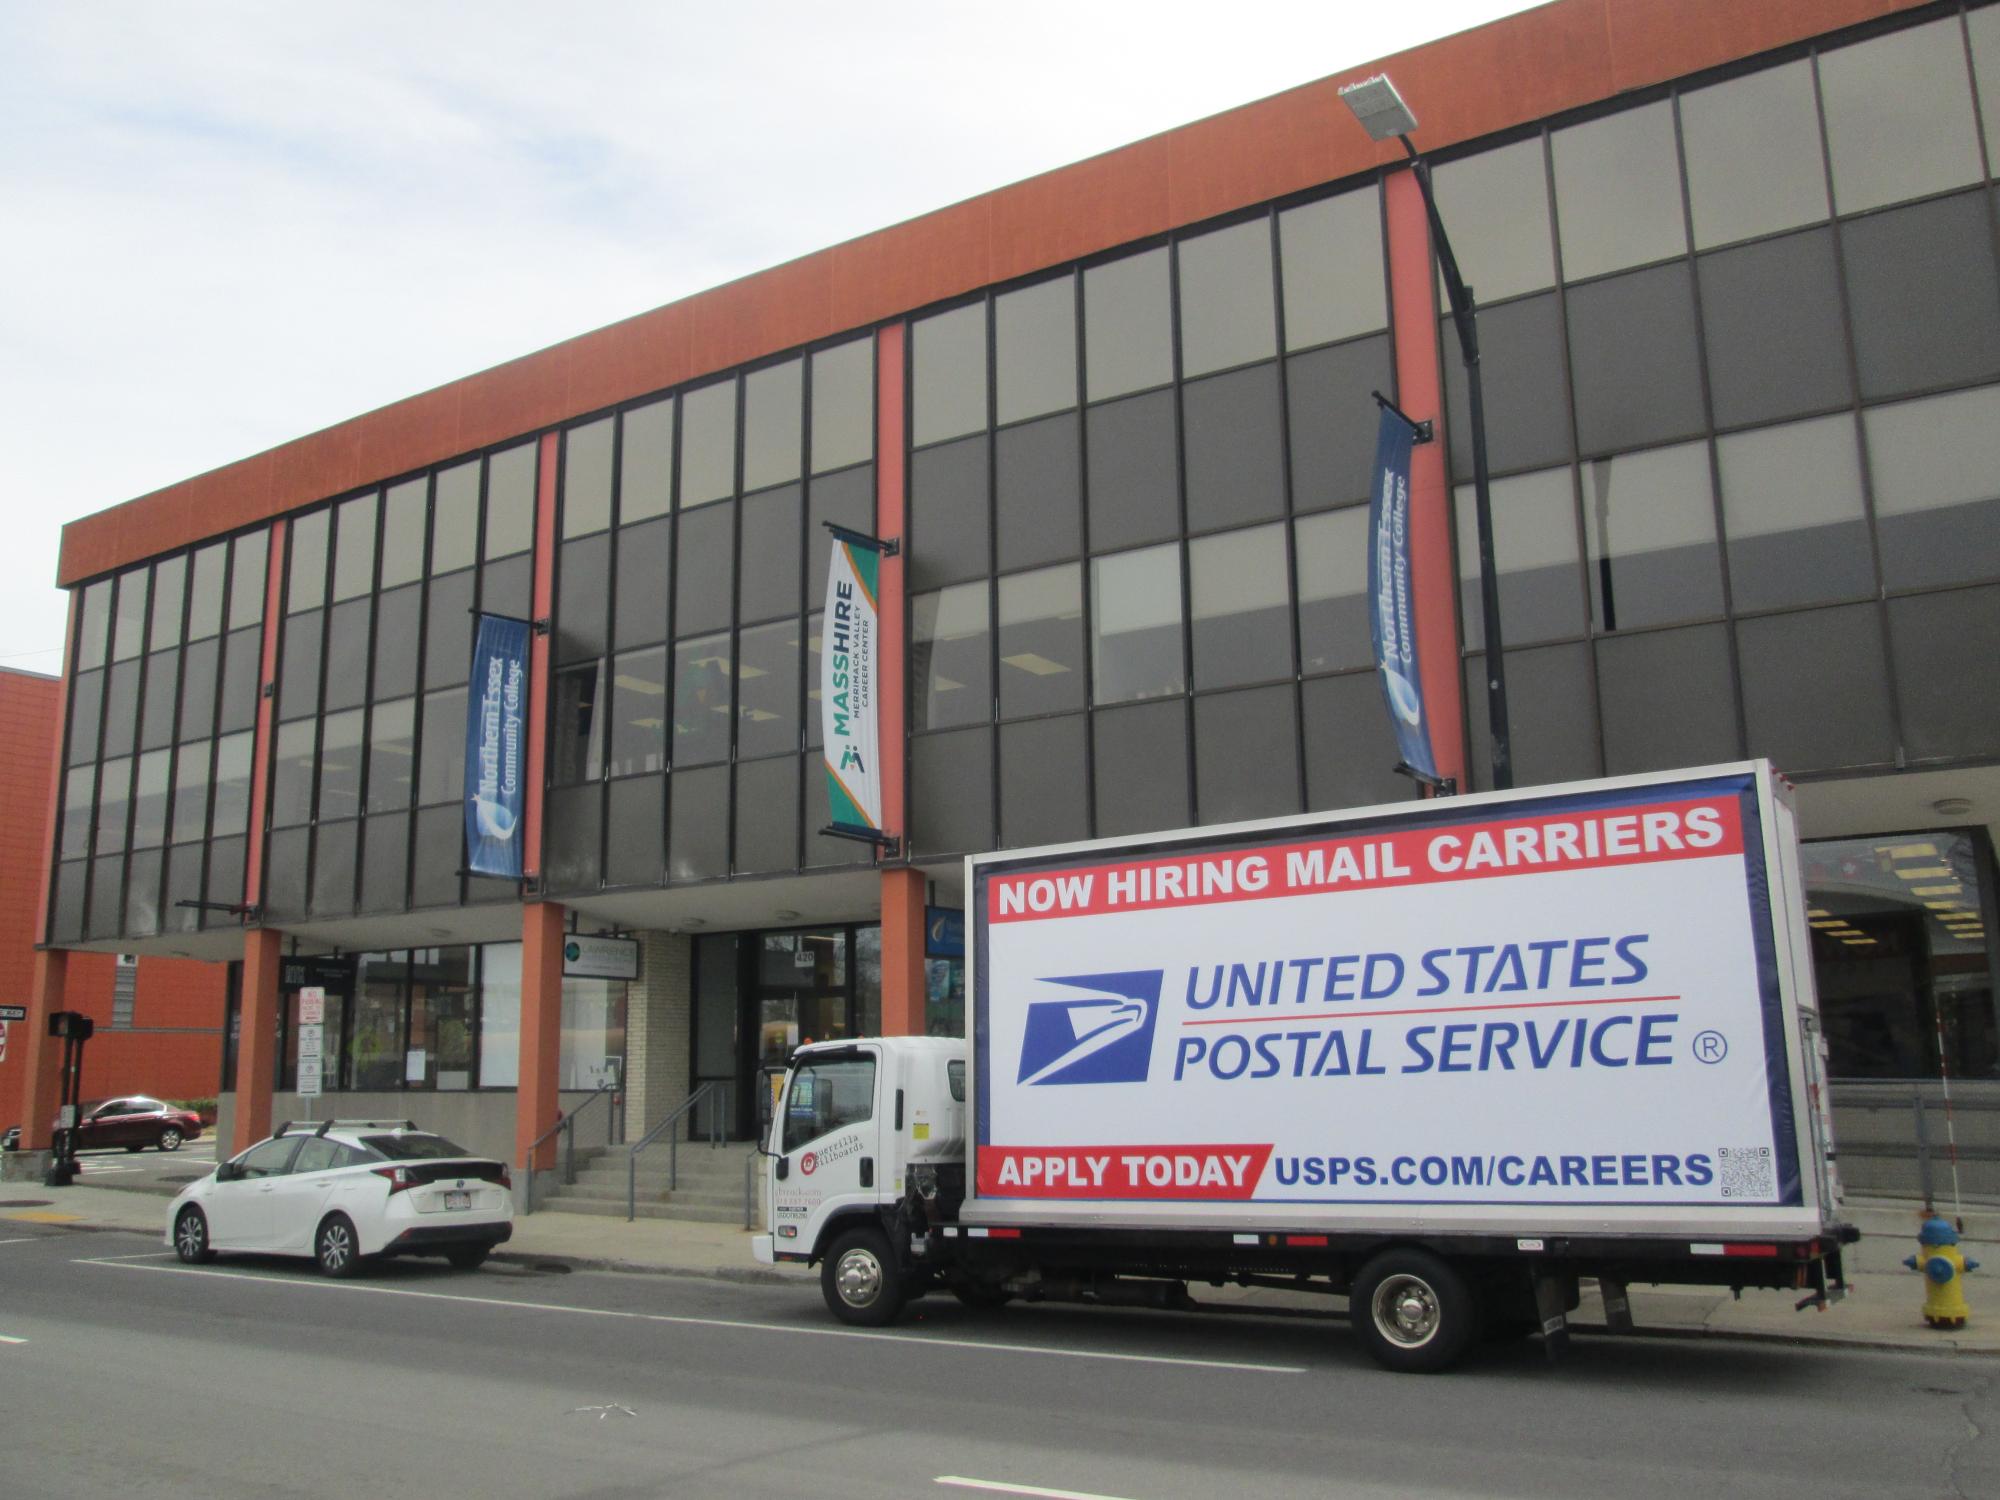 Mobile billboard truck stopped at the Mass Hire Career Center in Lawrence MA.